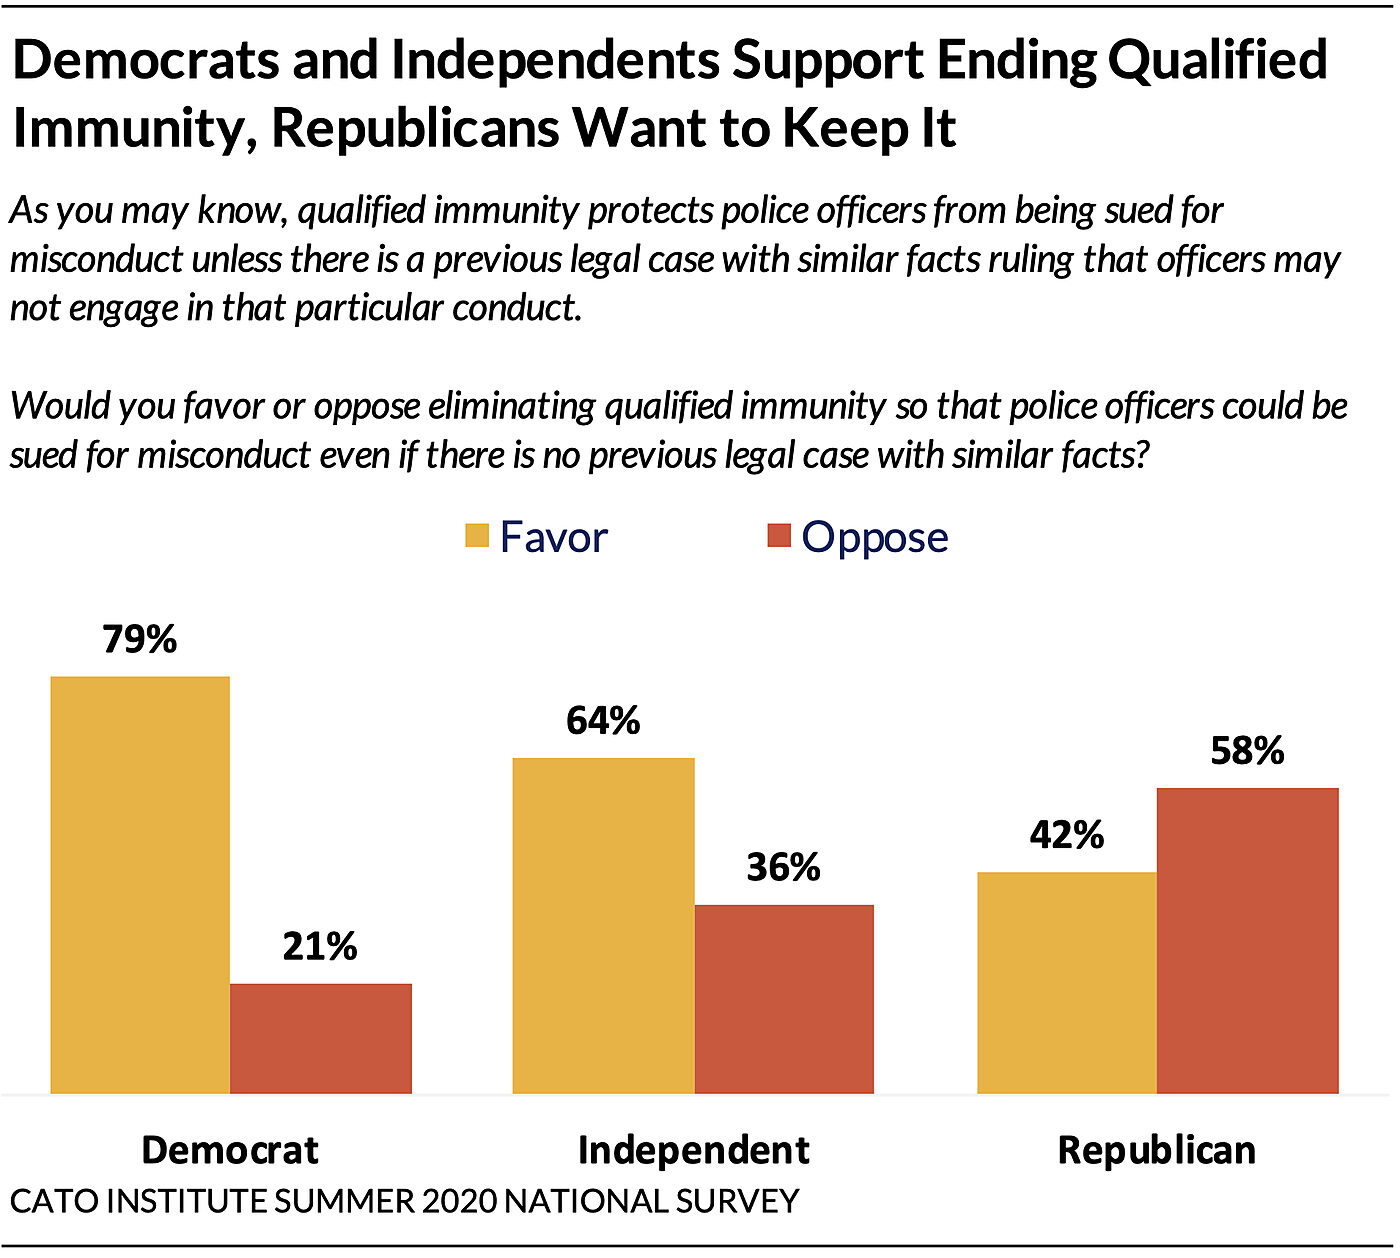 Democrats and Independents Support Ending Qualified Immunity, Republicans Want to Keep It